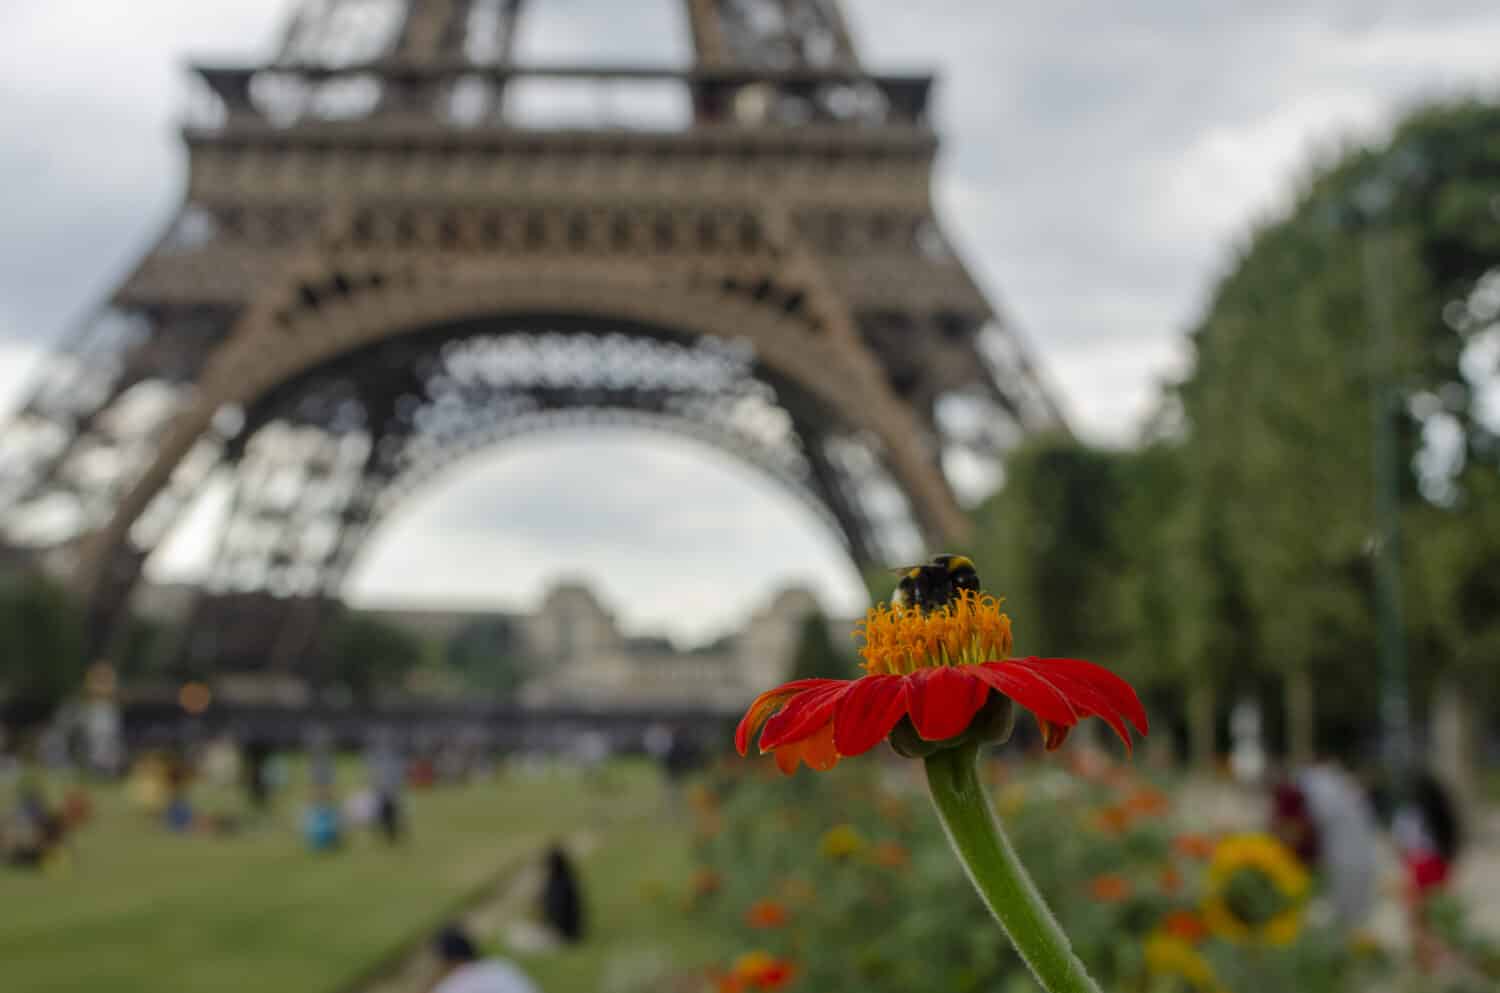 Flower with bumble-bee on it in Parc Champs du Mars with view of Eiffel Tower